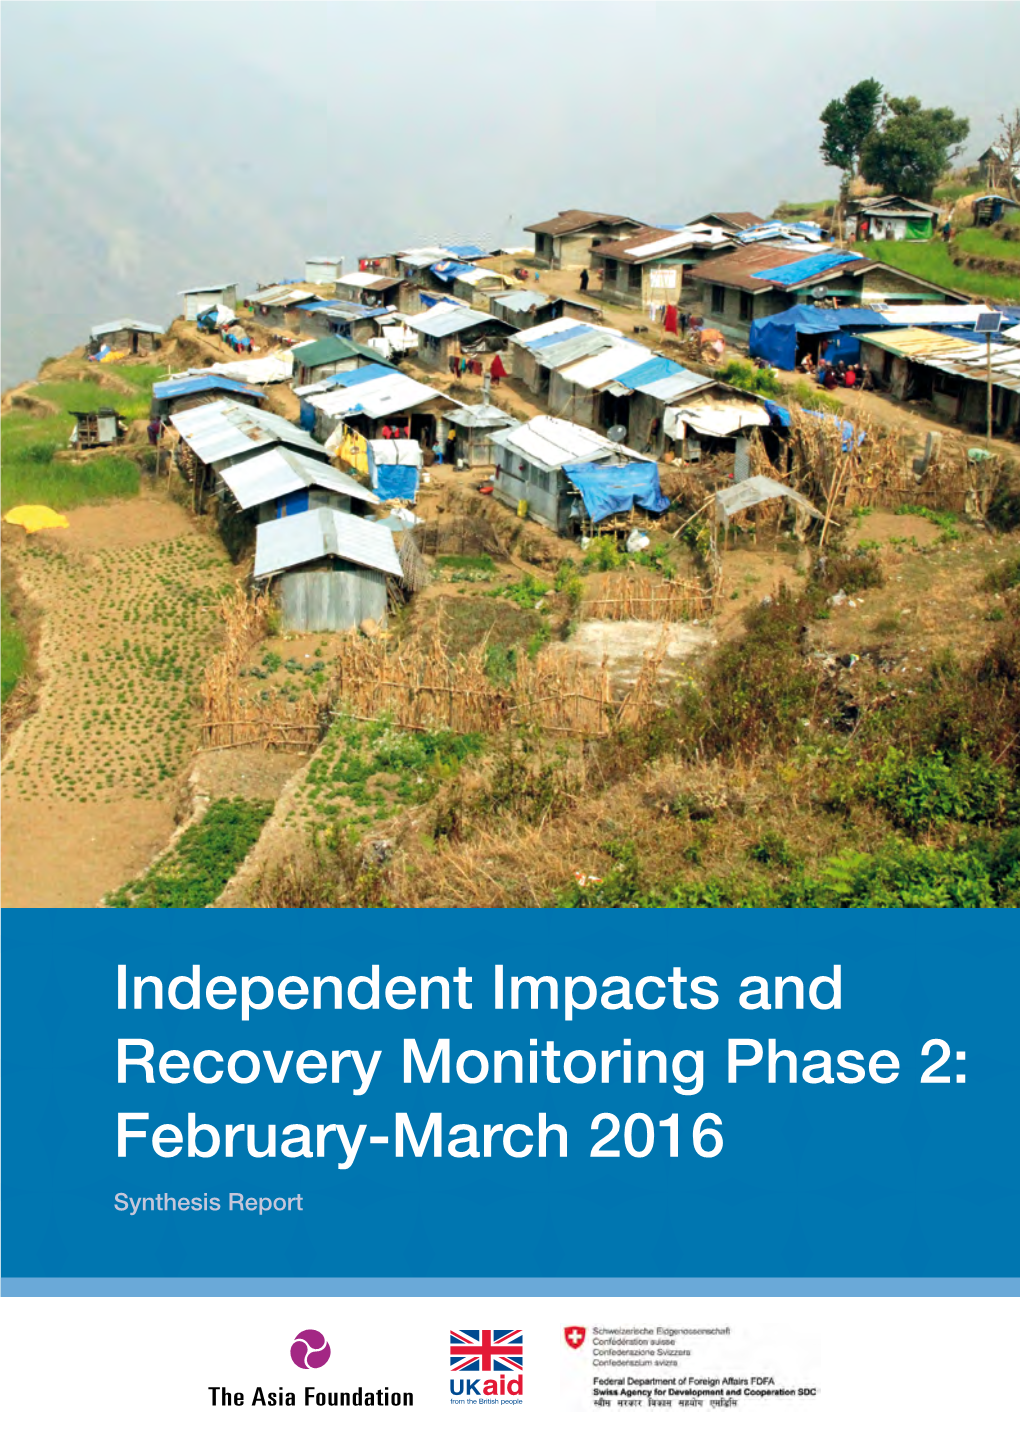 Independent Impacts and Recovery Monitoring Phase 2: February-March 2016 — Synthesis Report